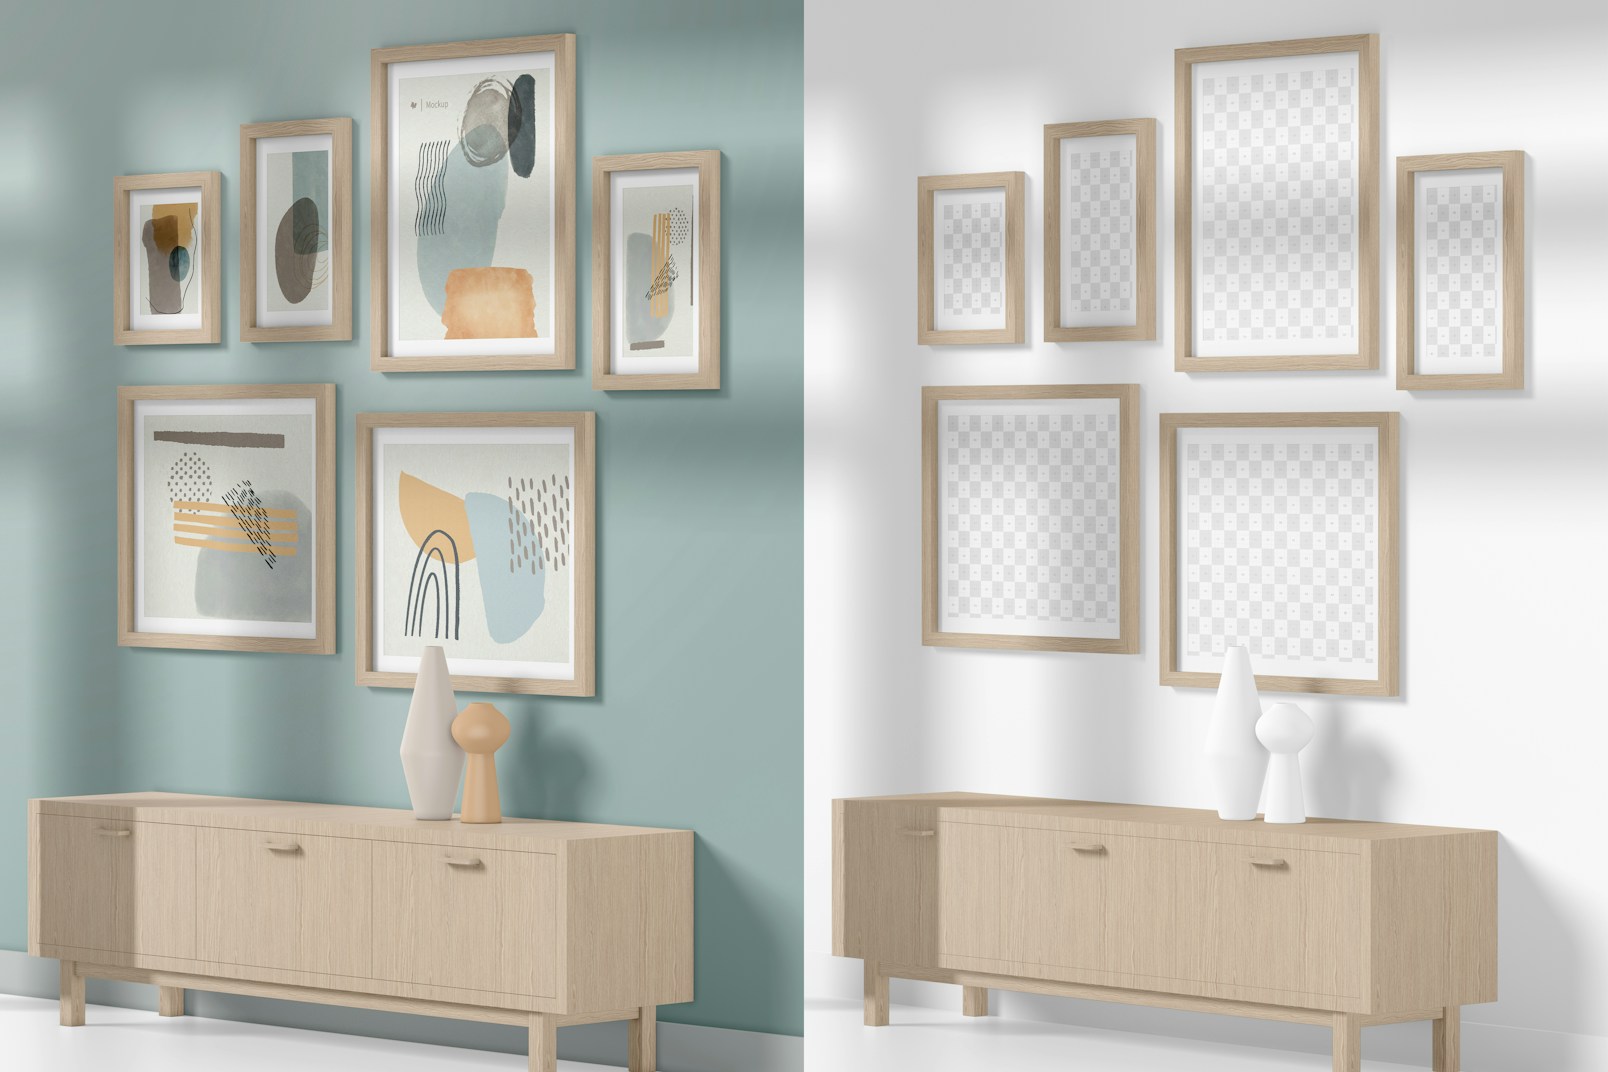 6 Gallery Frames with Cabinet Mockup, Perspective